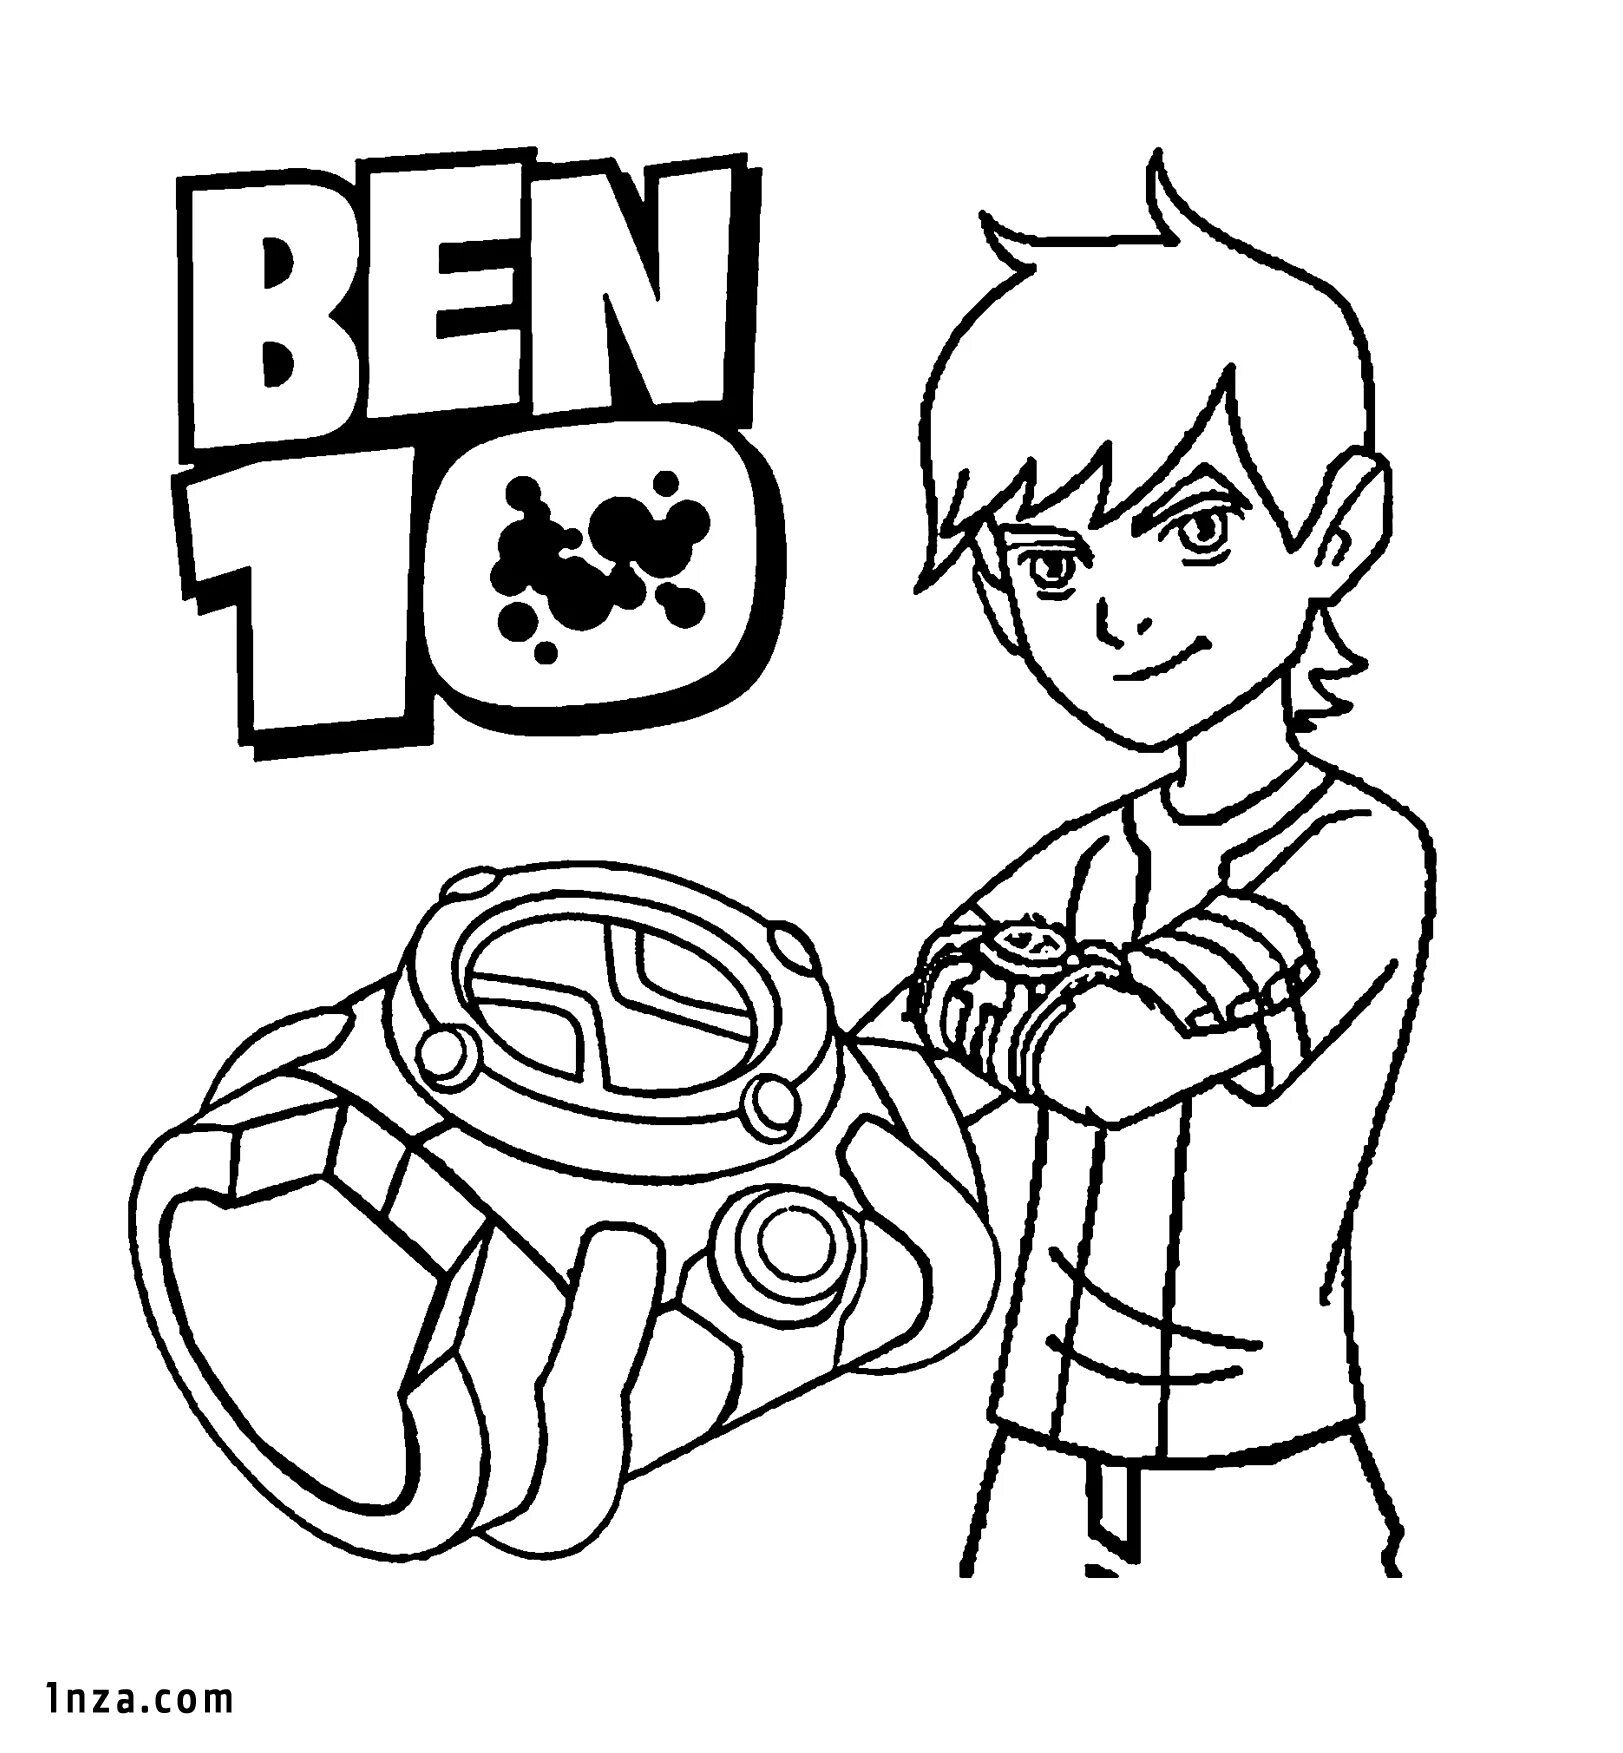 Ben 10 omnitrix coloring page filled with colors